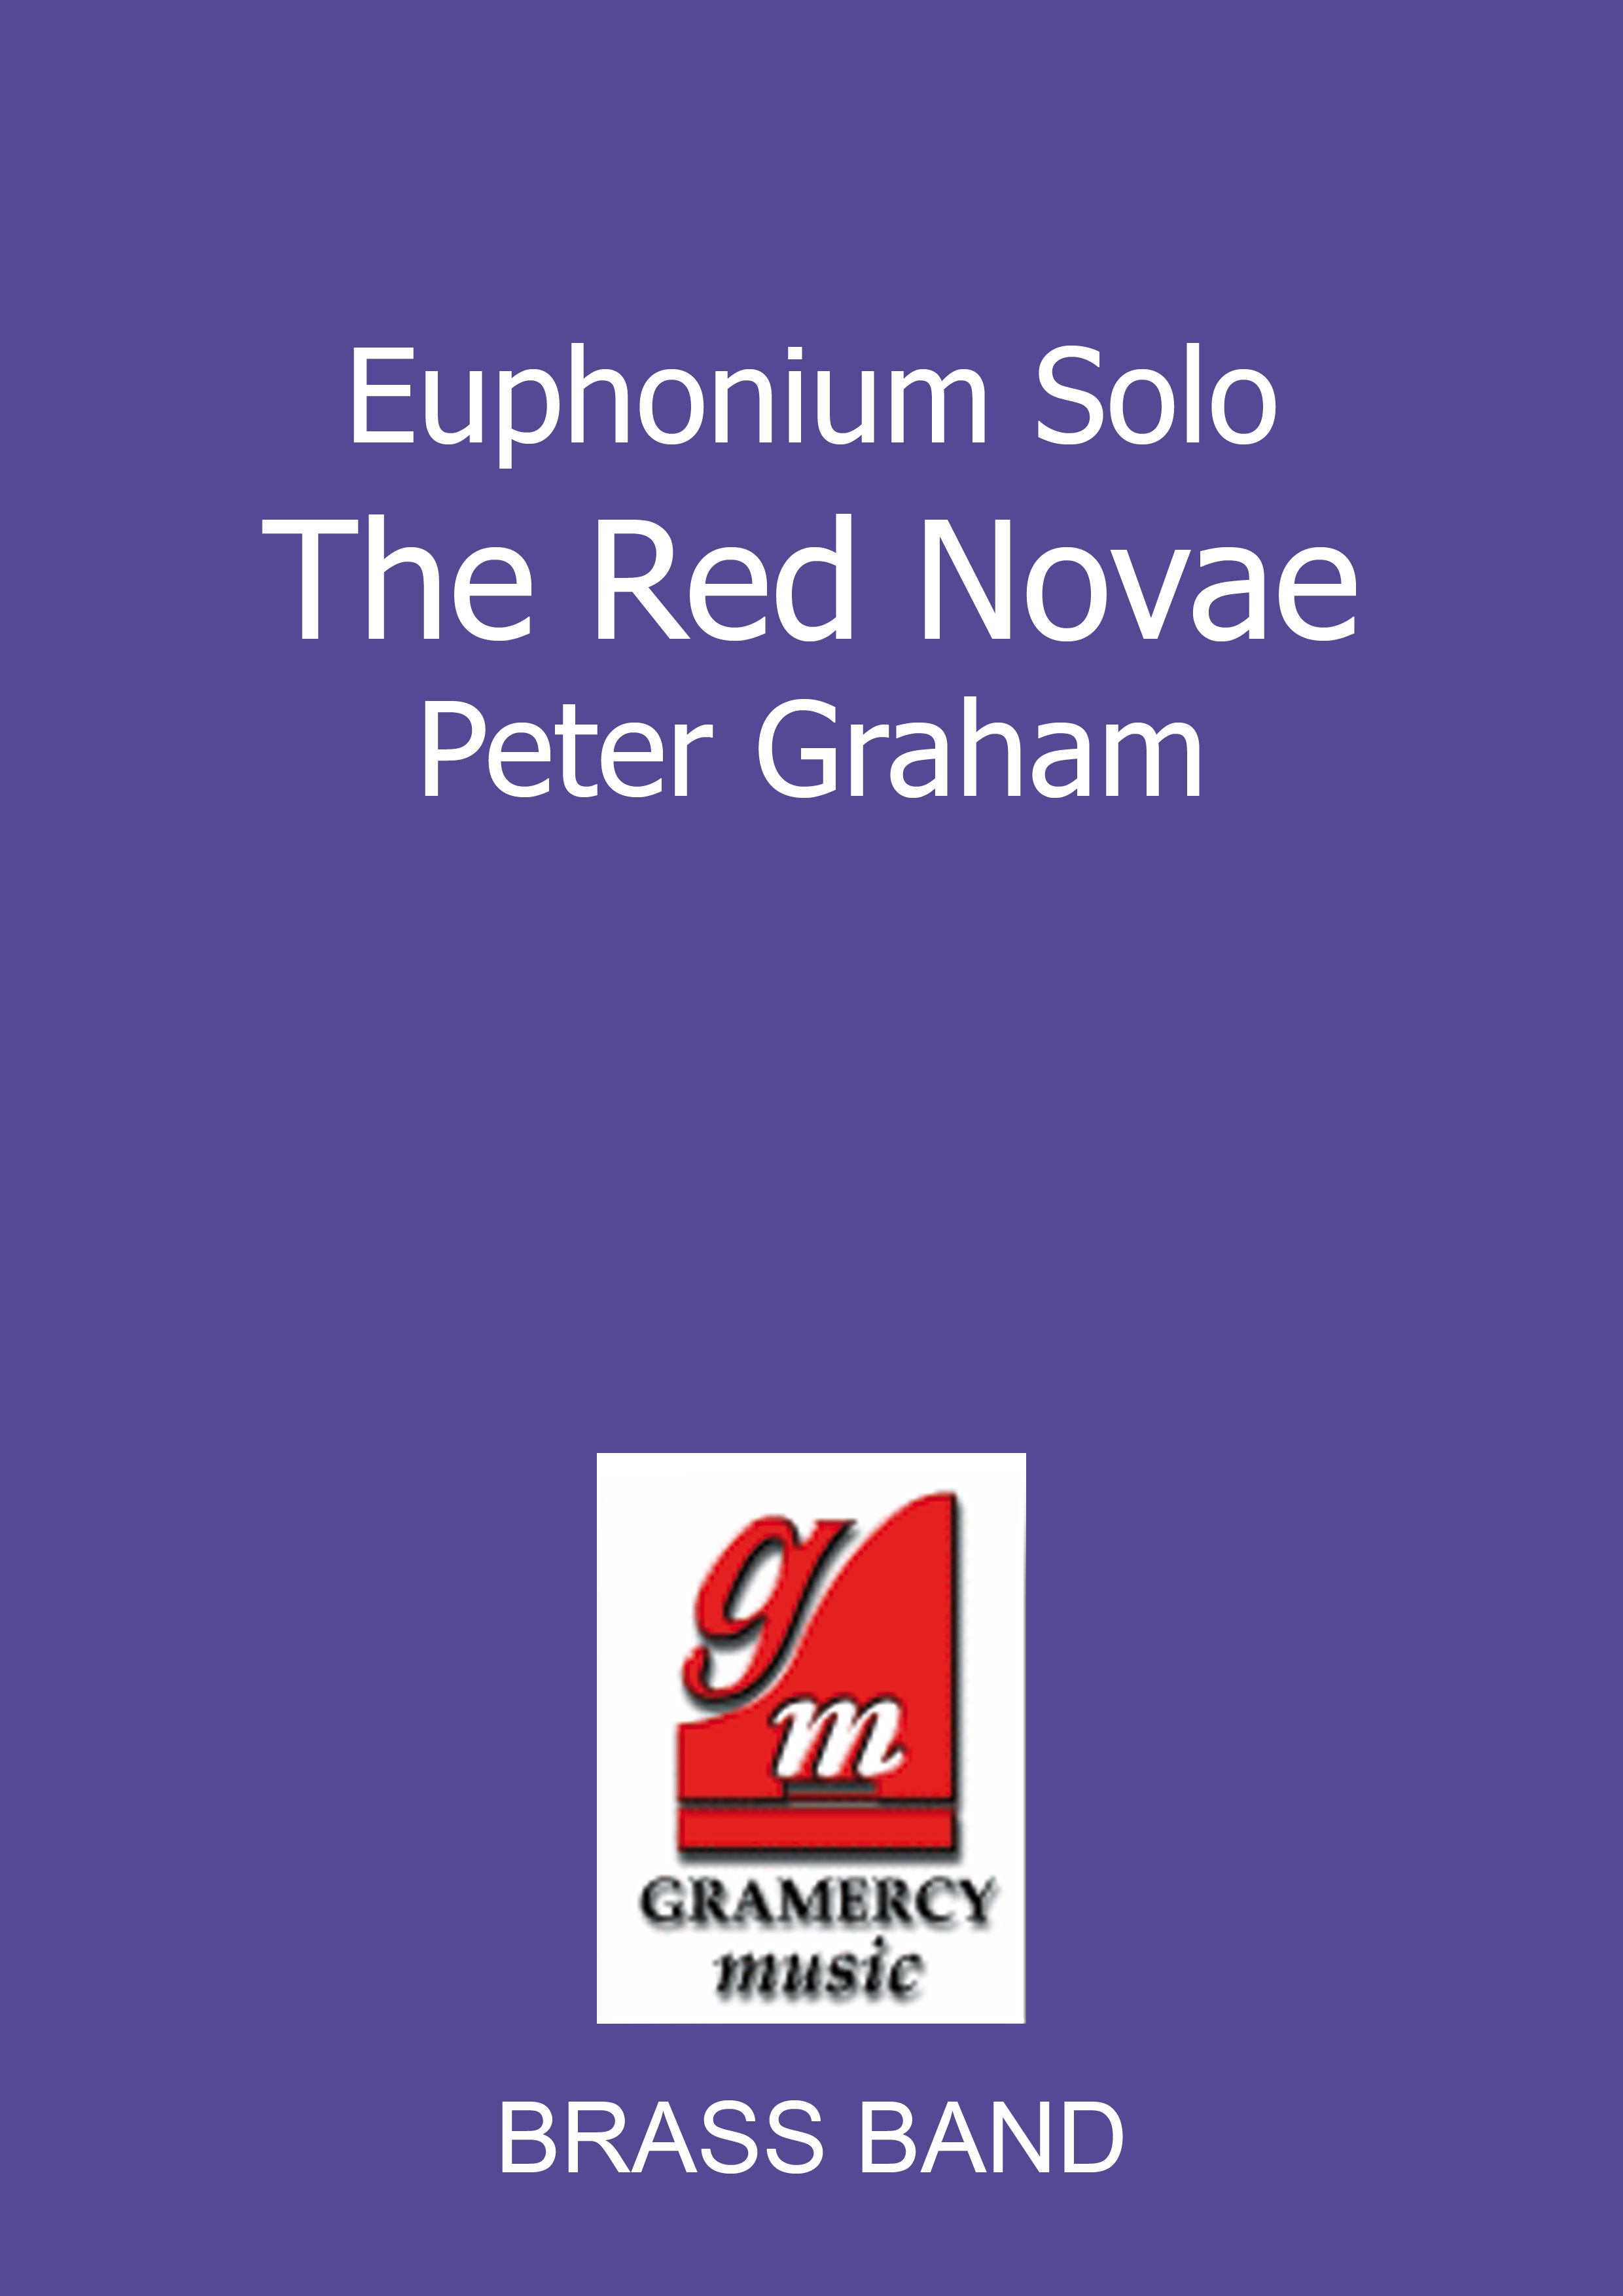 The Red Novae (Euphonium Solo with Brass Band - Score and Parts)